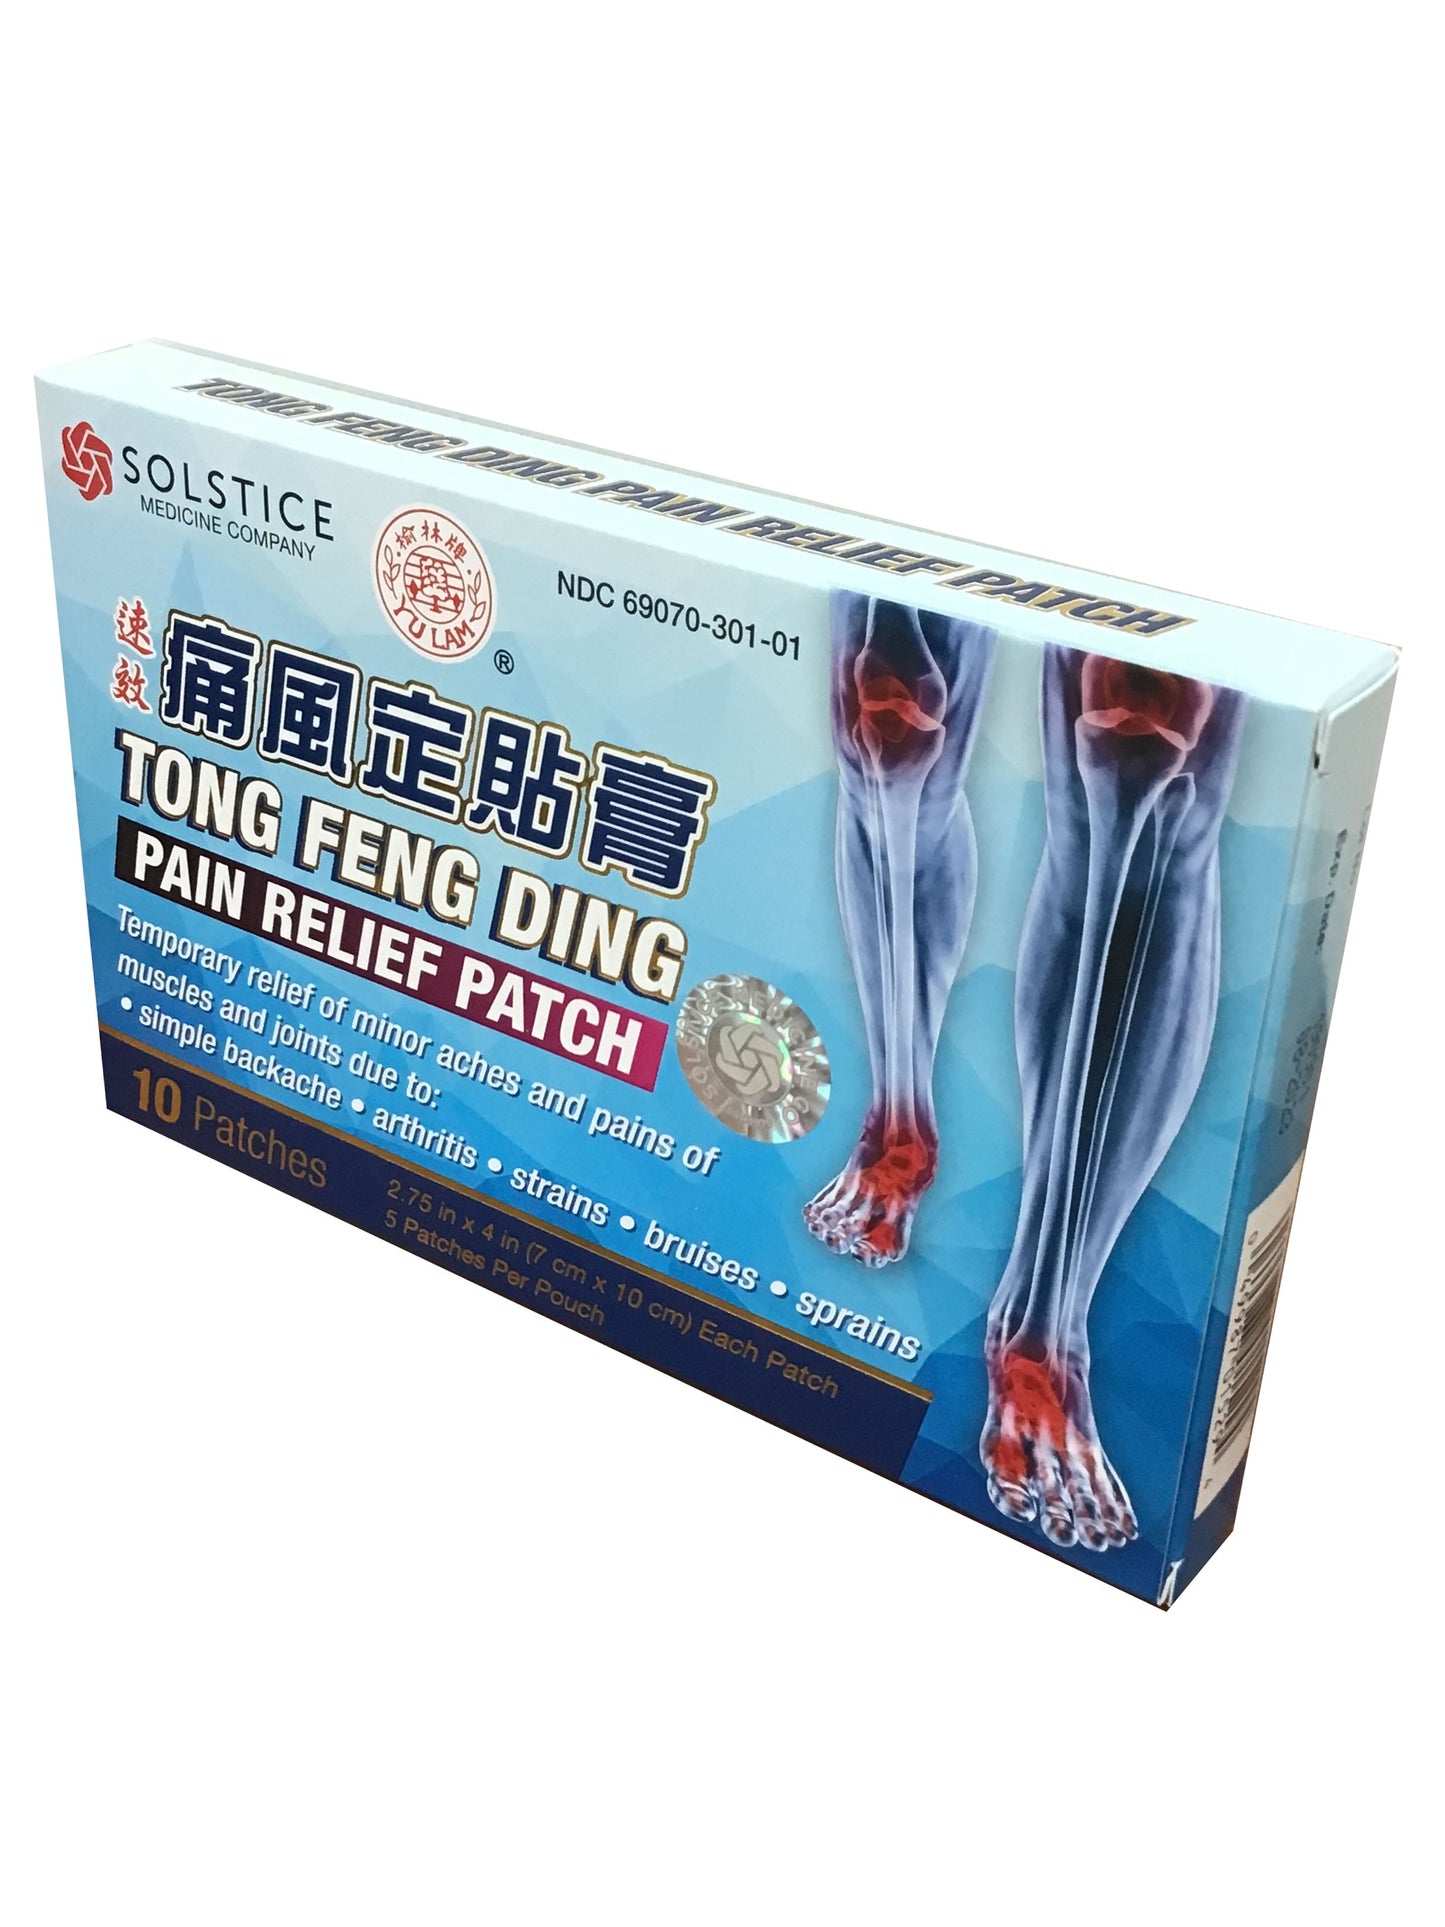 Solstice Tong Feng Ding Pain Relief Patch 10 Patches 榆林牌 痛風定貼膏